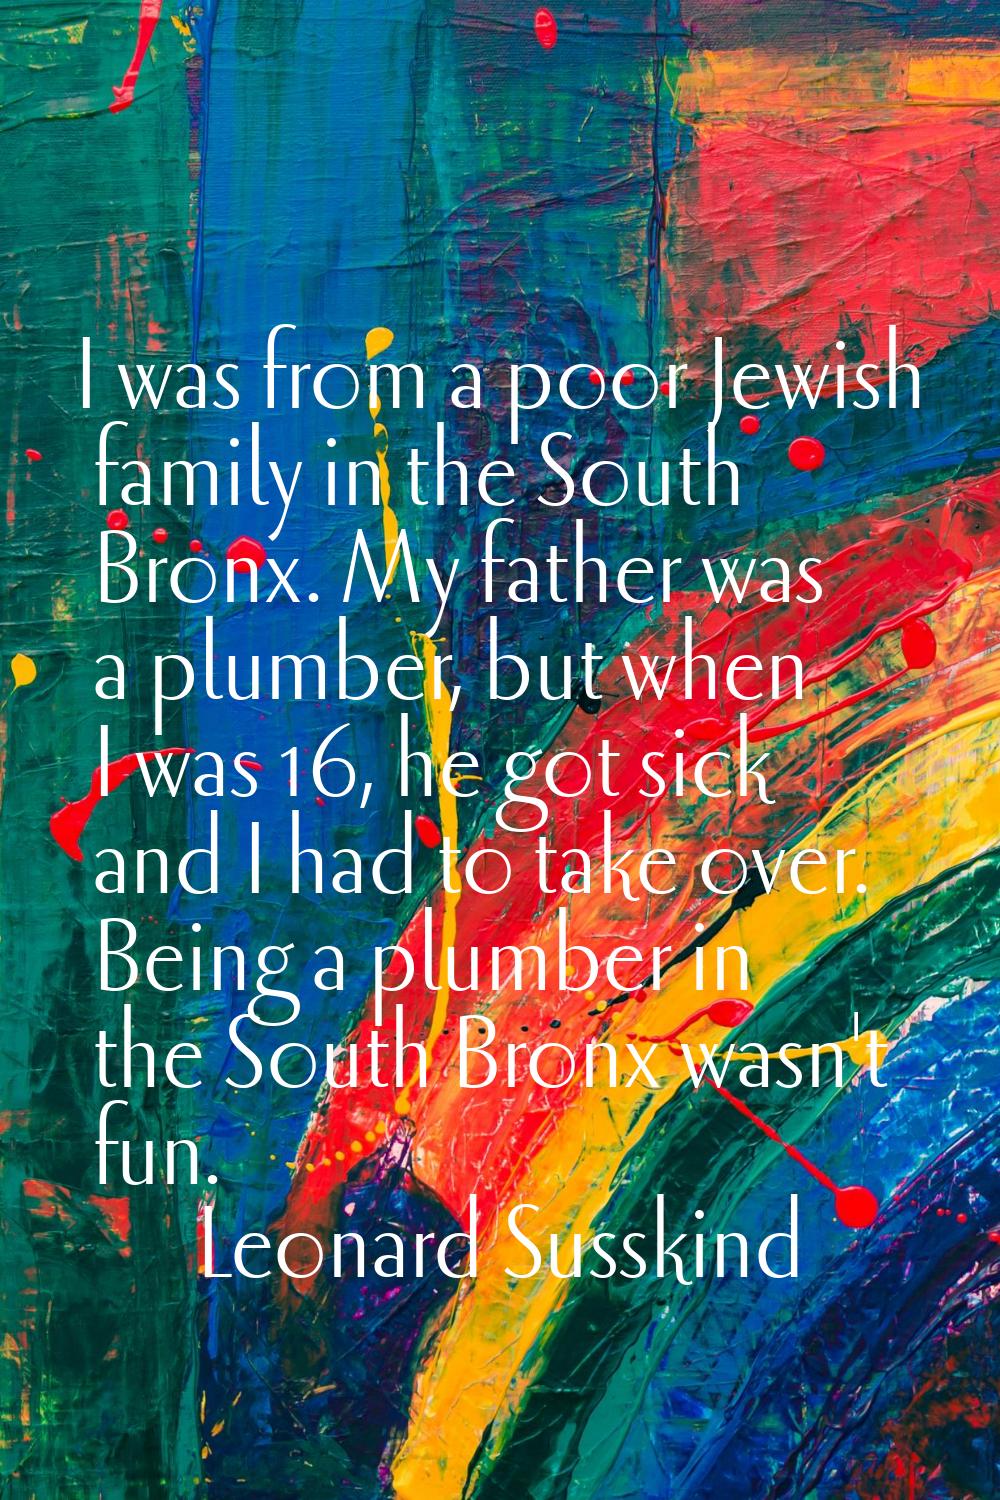 I was from a poor Jewish family in the South Bronx. My father was a plumber, but when I was 16, he 